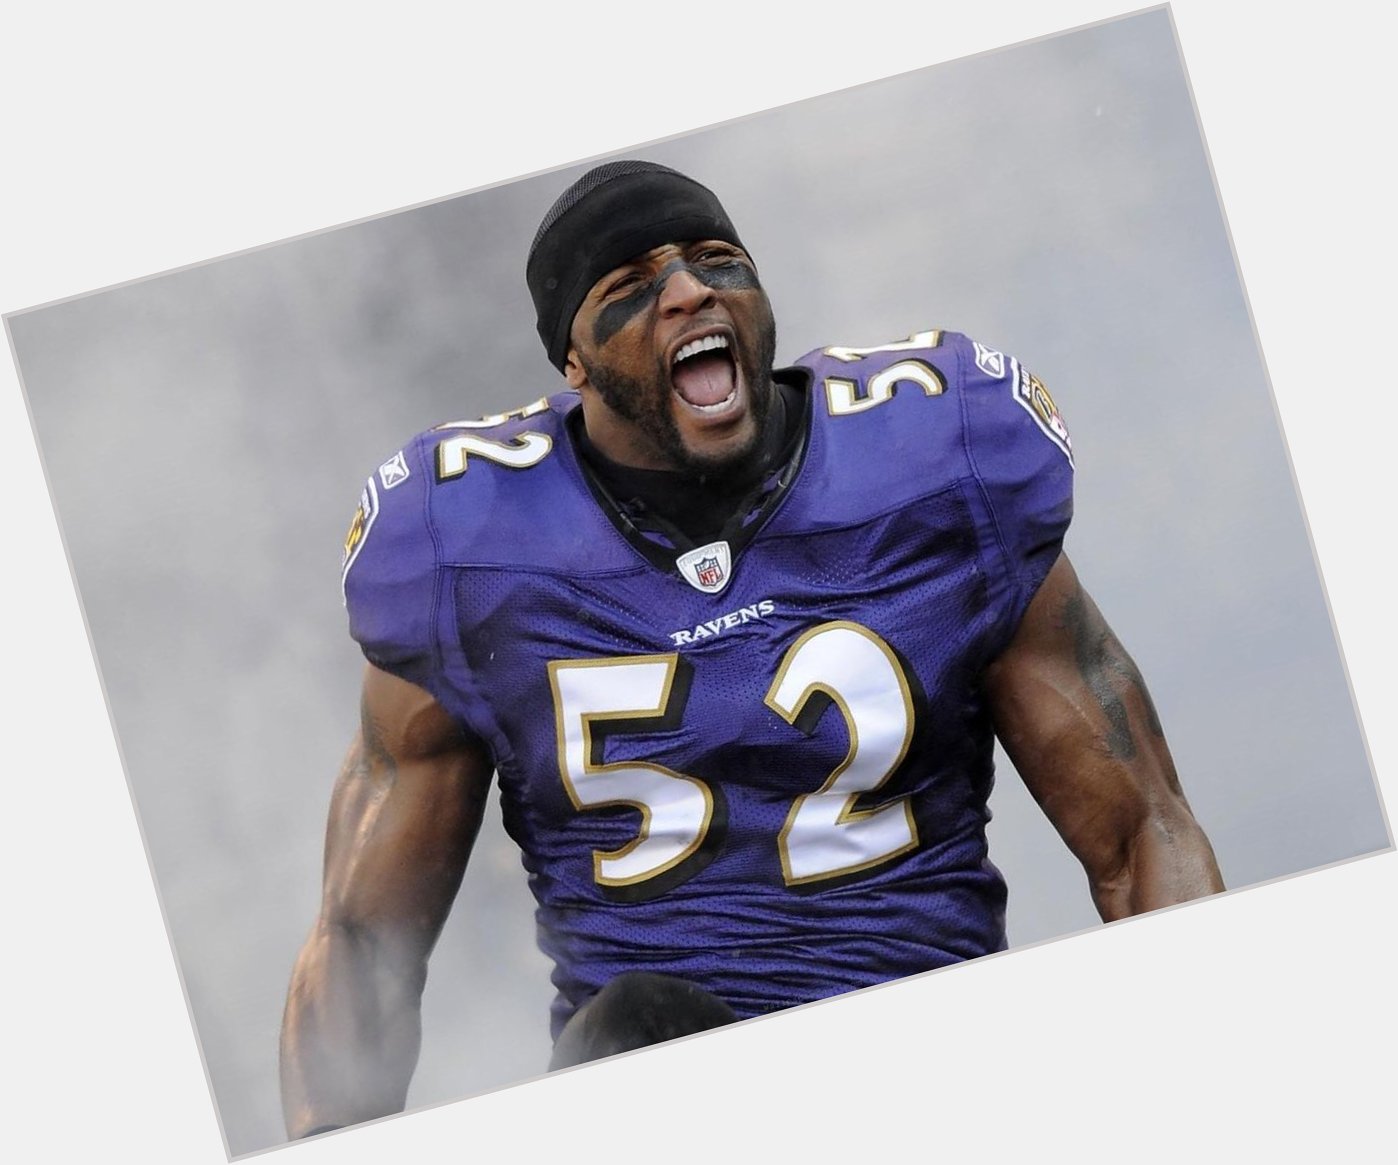 Happy Birthday to the Greatest of All Time. Ray Lewis. 